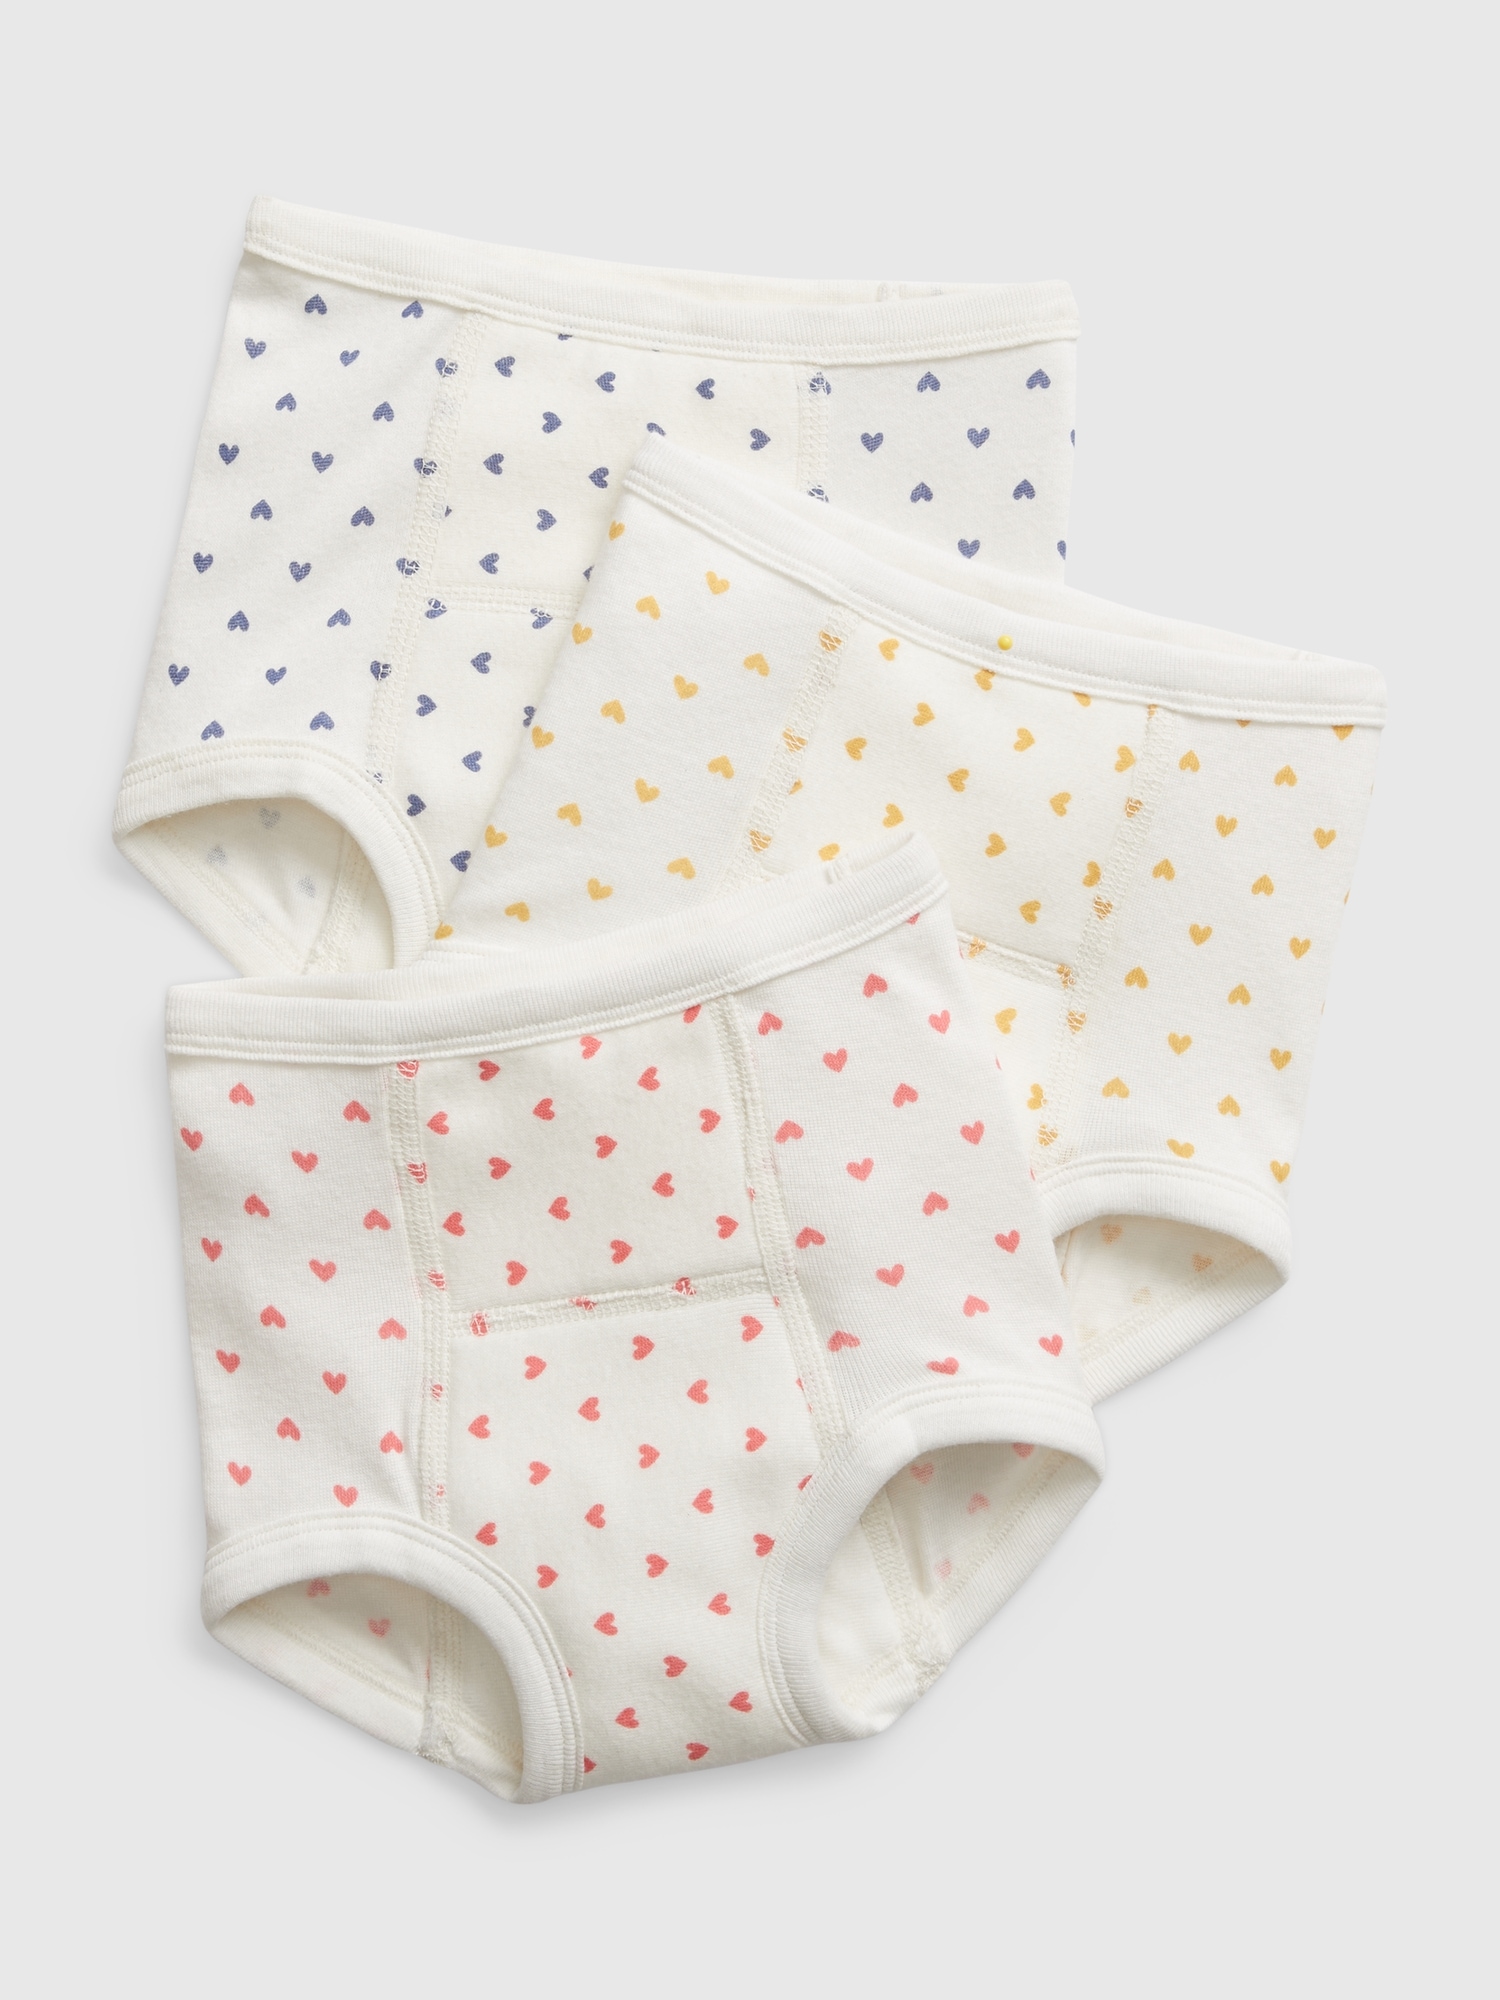 100% Organic Cotton Baby And Toddler Underwear Cotton Girls And